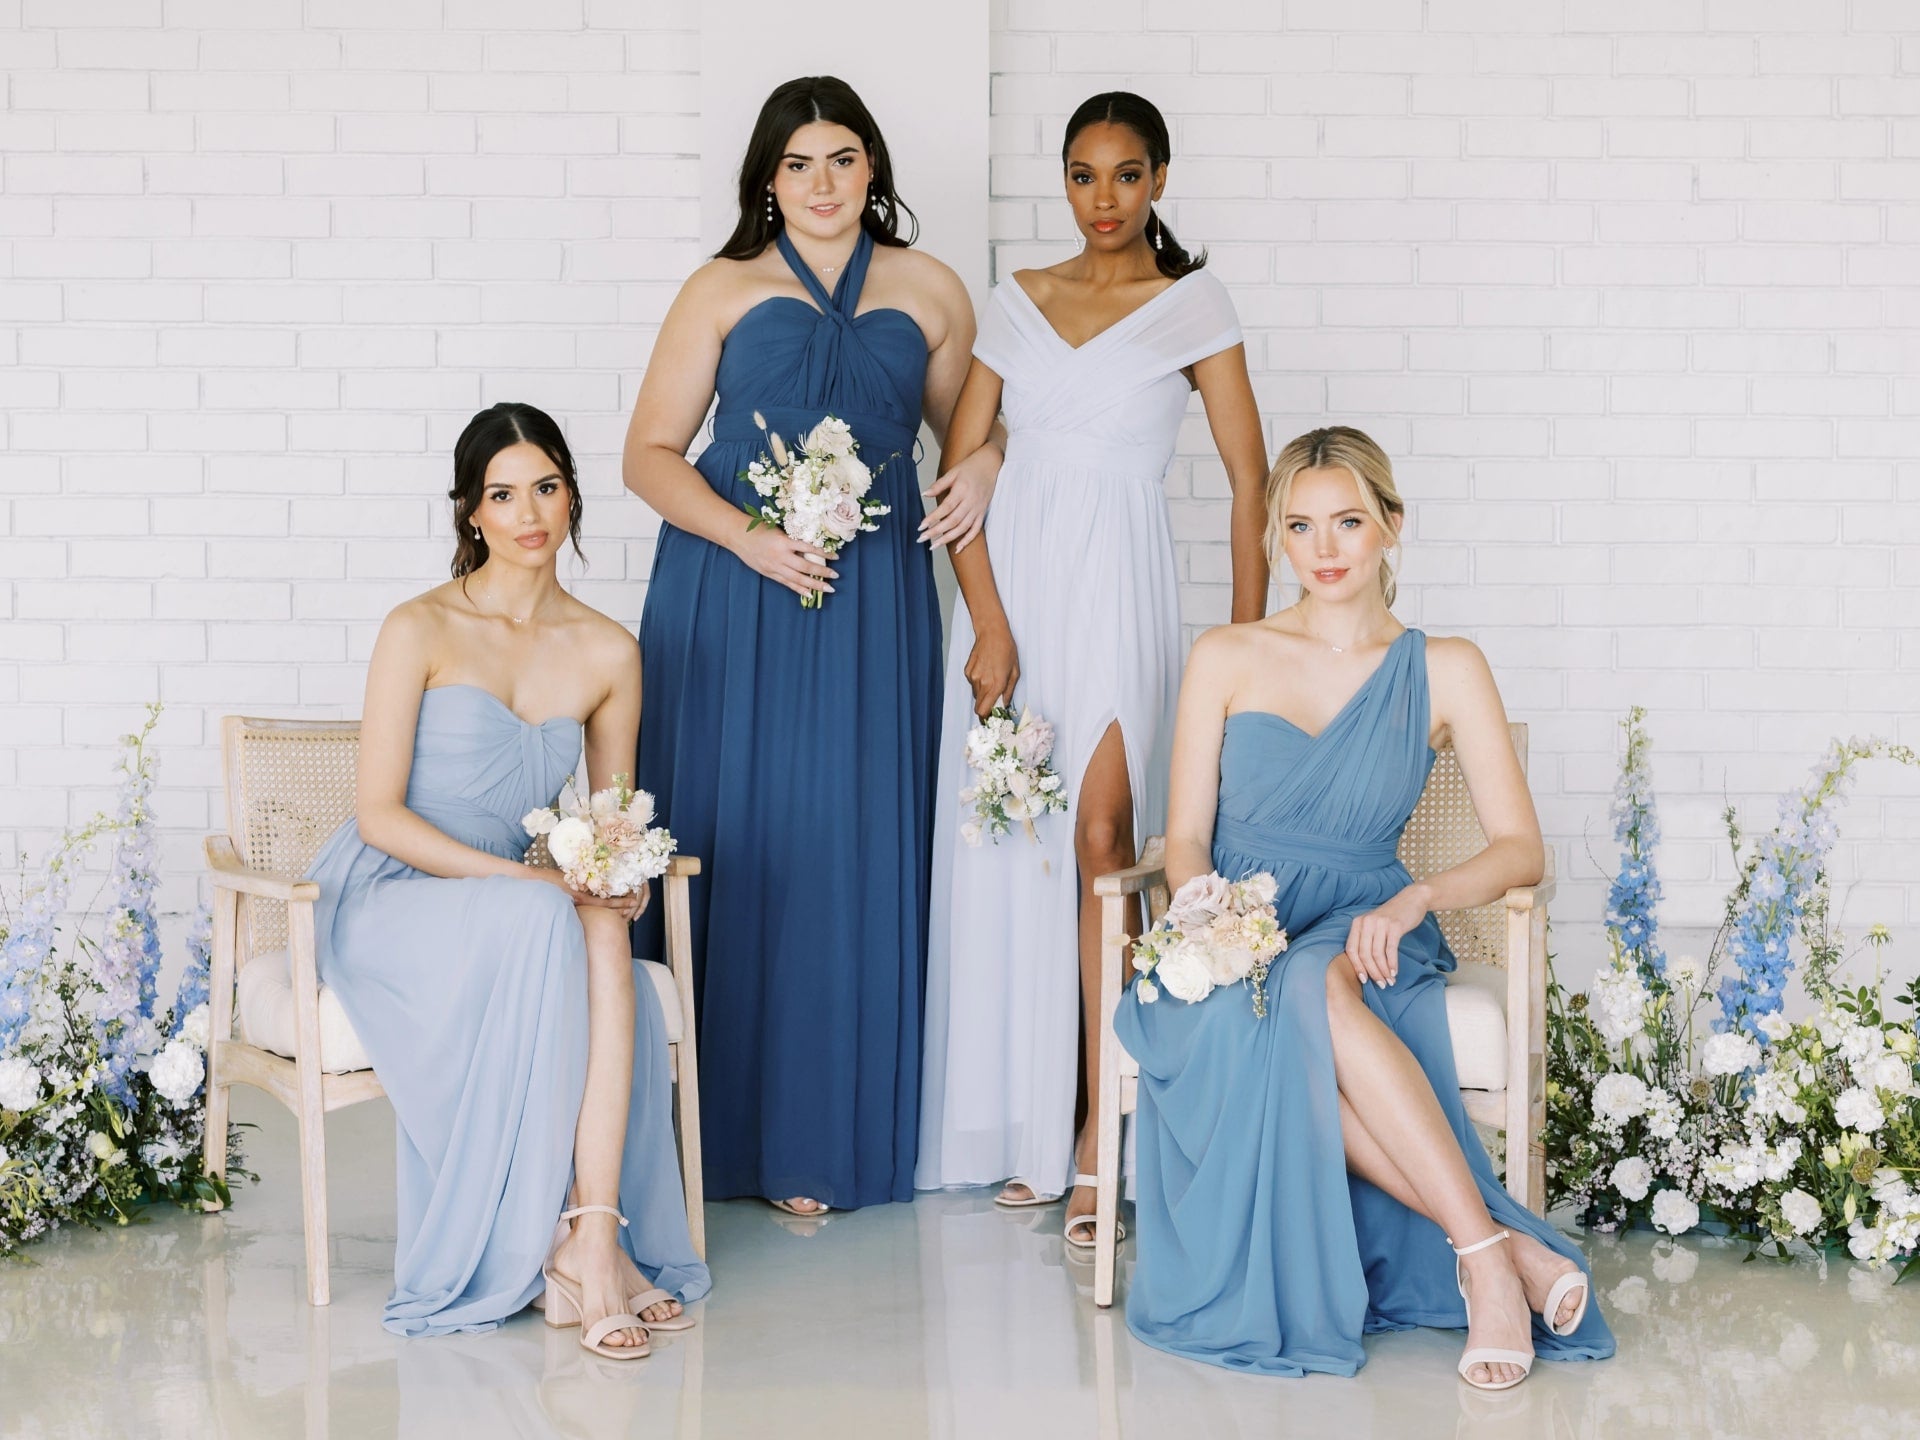 24 Cheap Bridesmaid Dresses to Shop in 2020 That Look Expensive | Allure